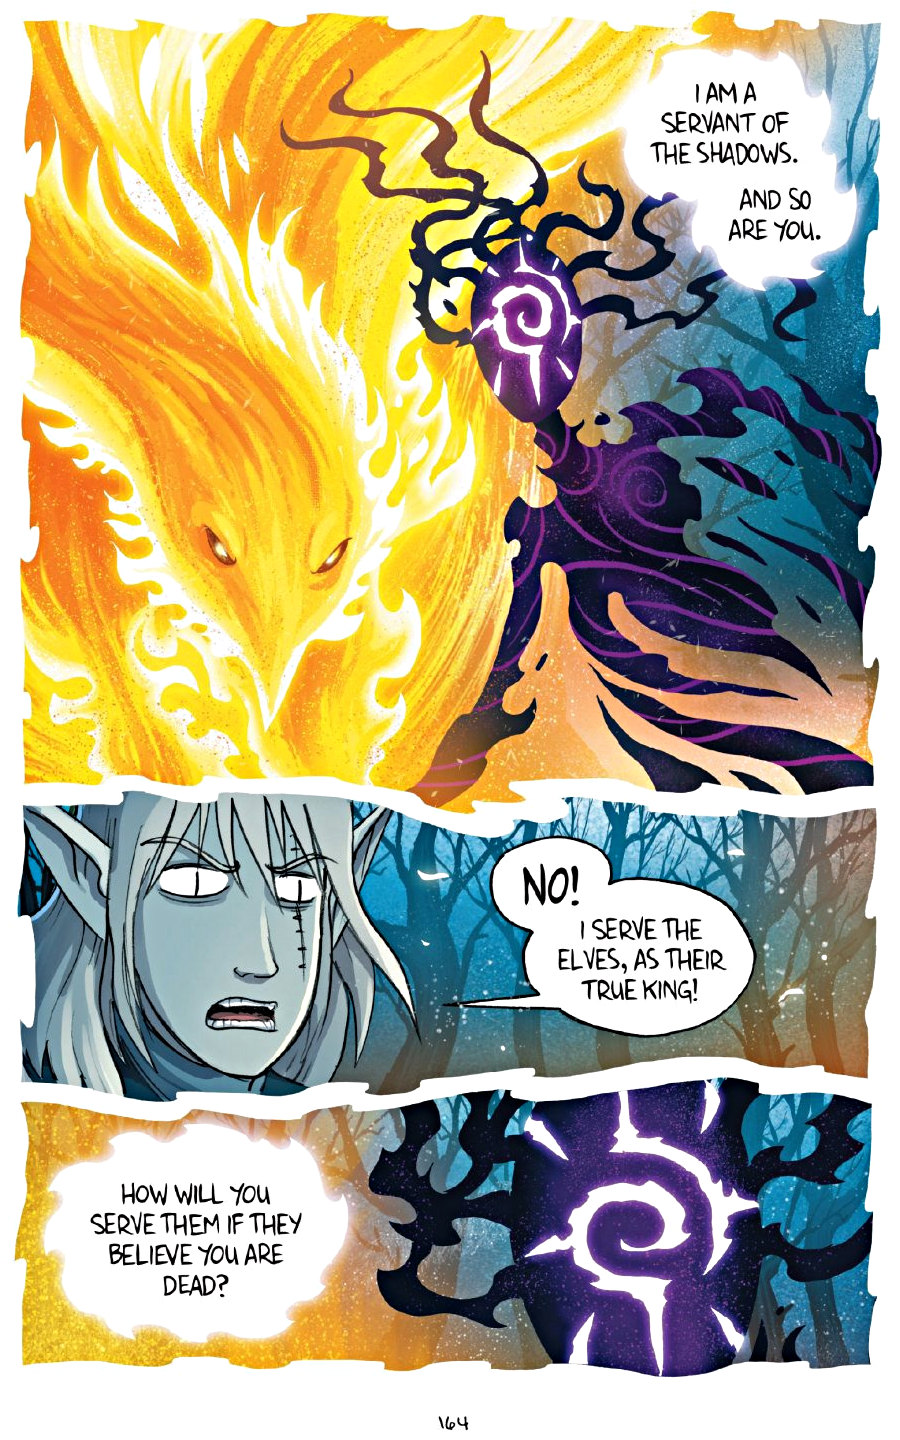 page 164 of amulet 7 firelight graphic novel